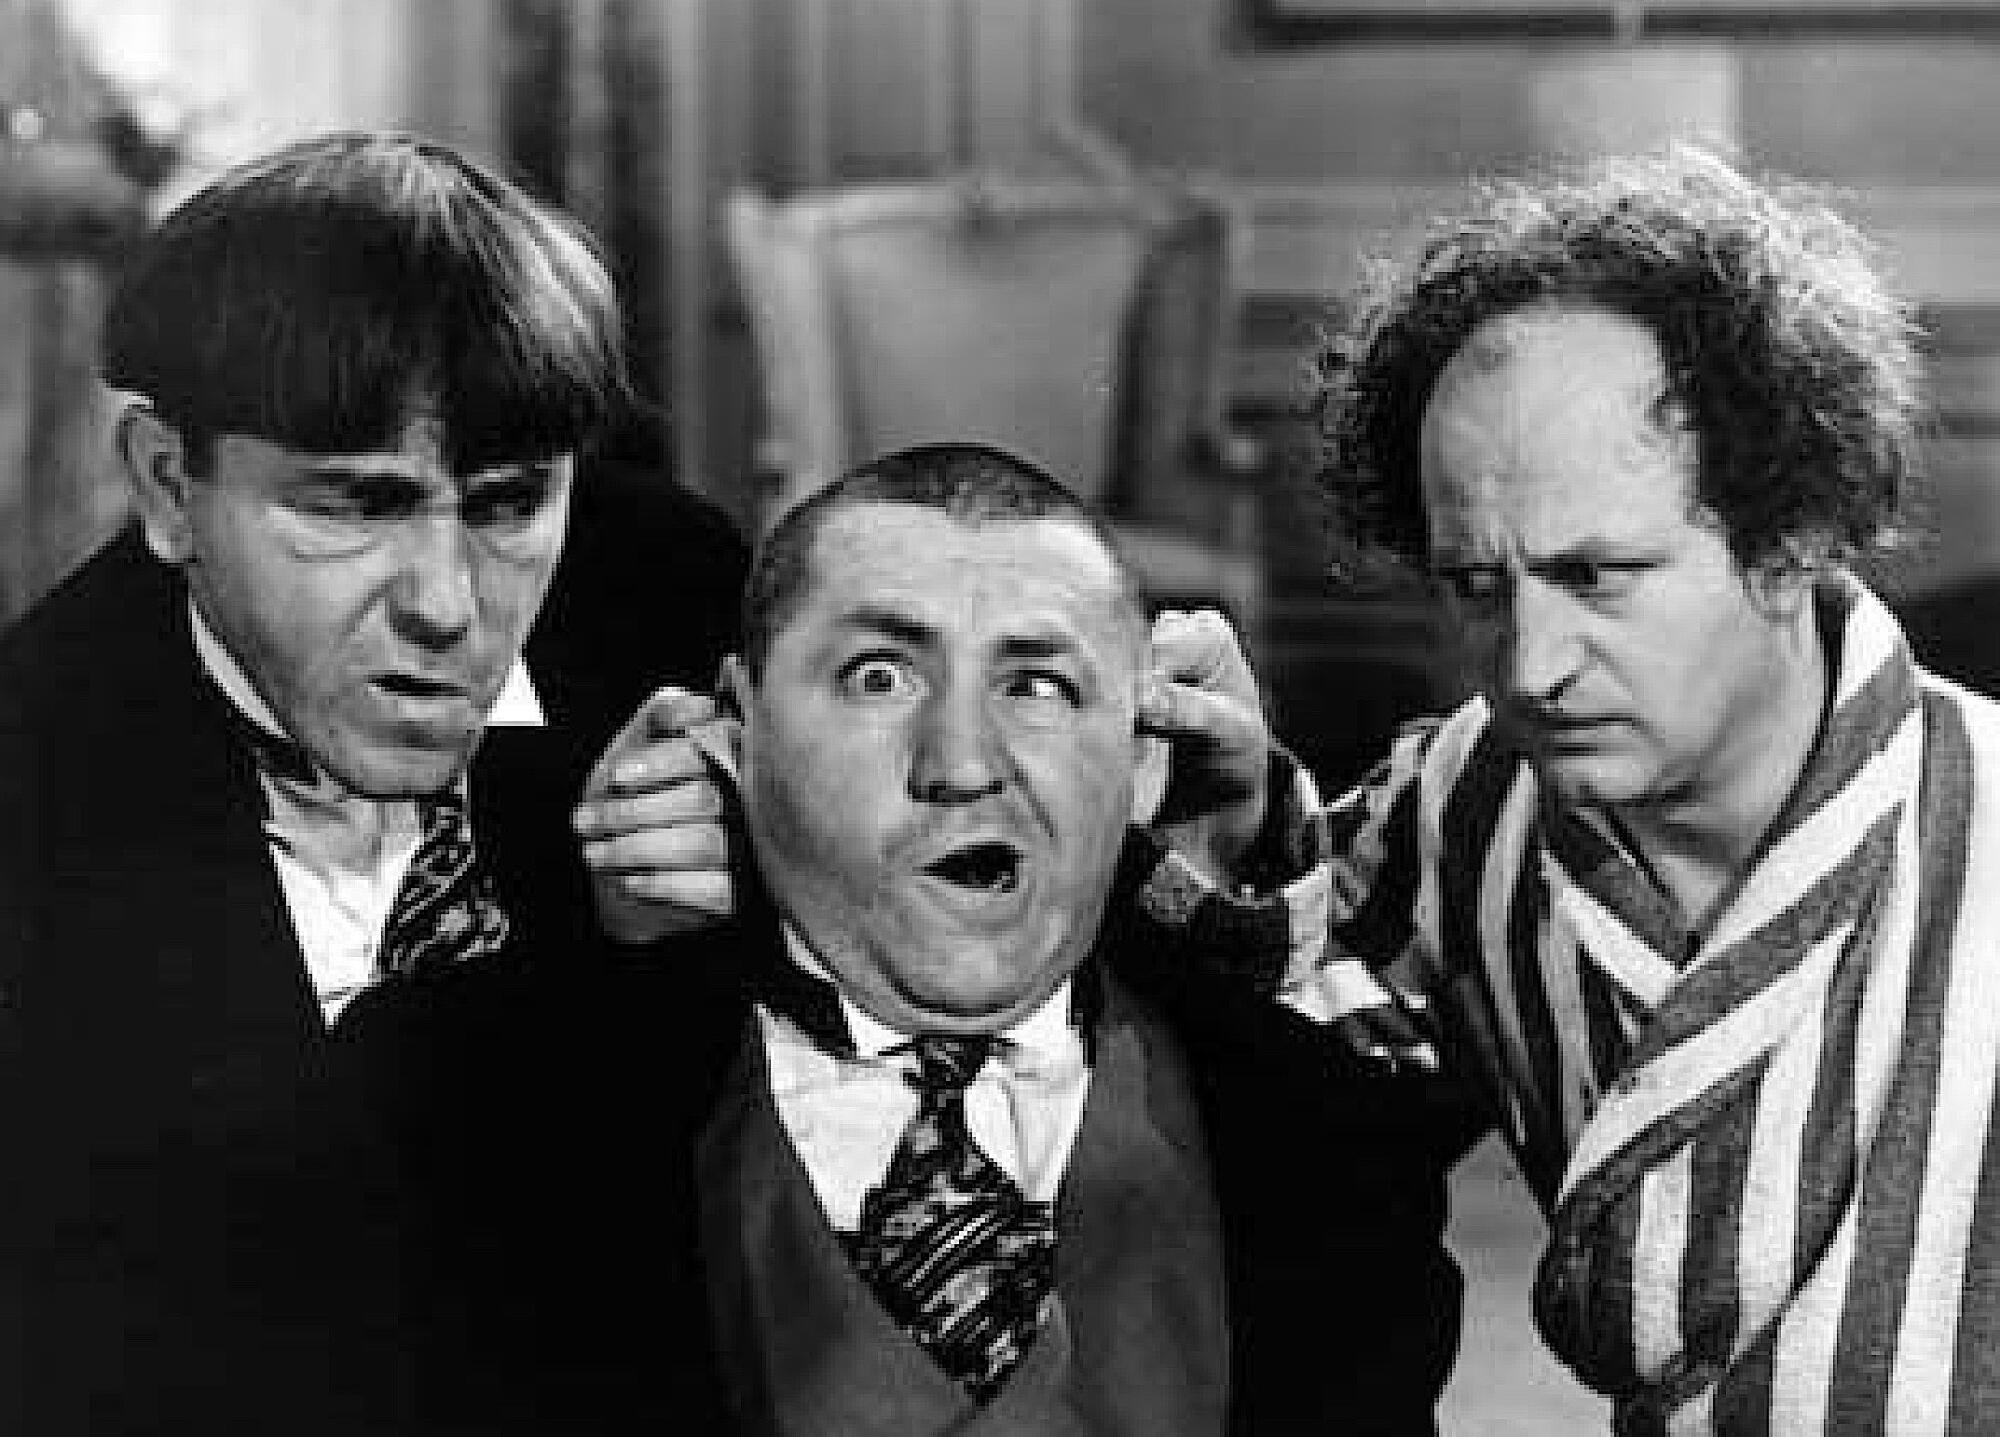 The Three Stooges' Moe Howard, left, Curly Howard and Larry Fine